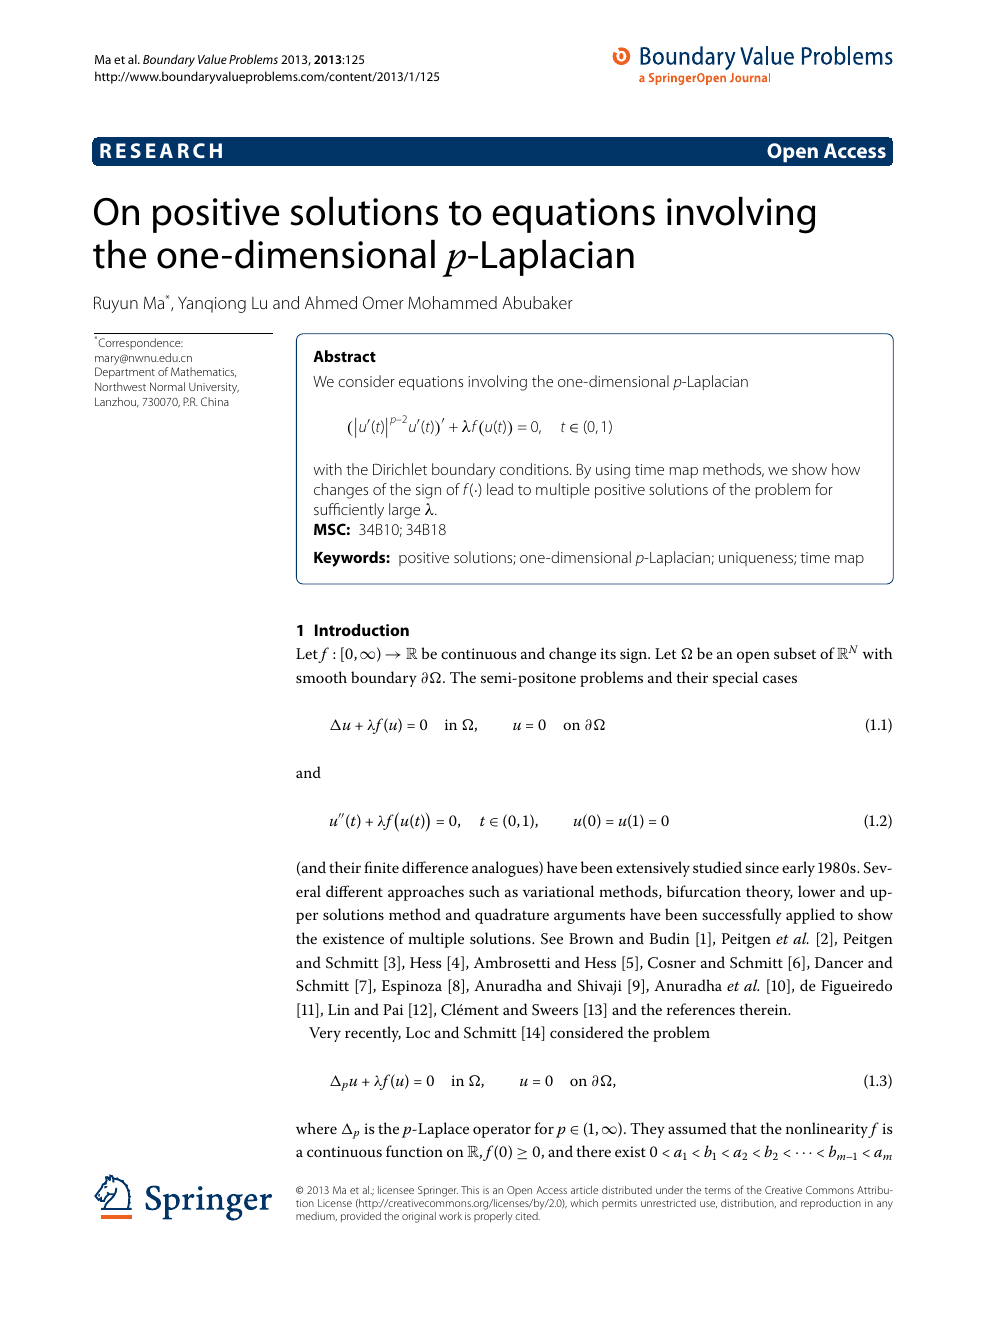 On Positive Solutions To Equations Involving The One Dimensional P Laplacian Topic Of Research Paper In Mathematics Download Scholarly Article Pdf And Read For Free On Cyberleninka Open Science Hub